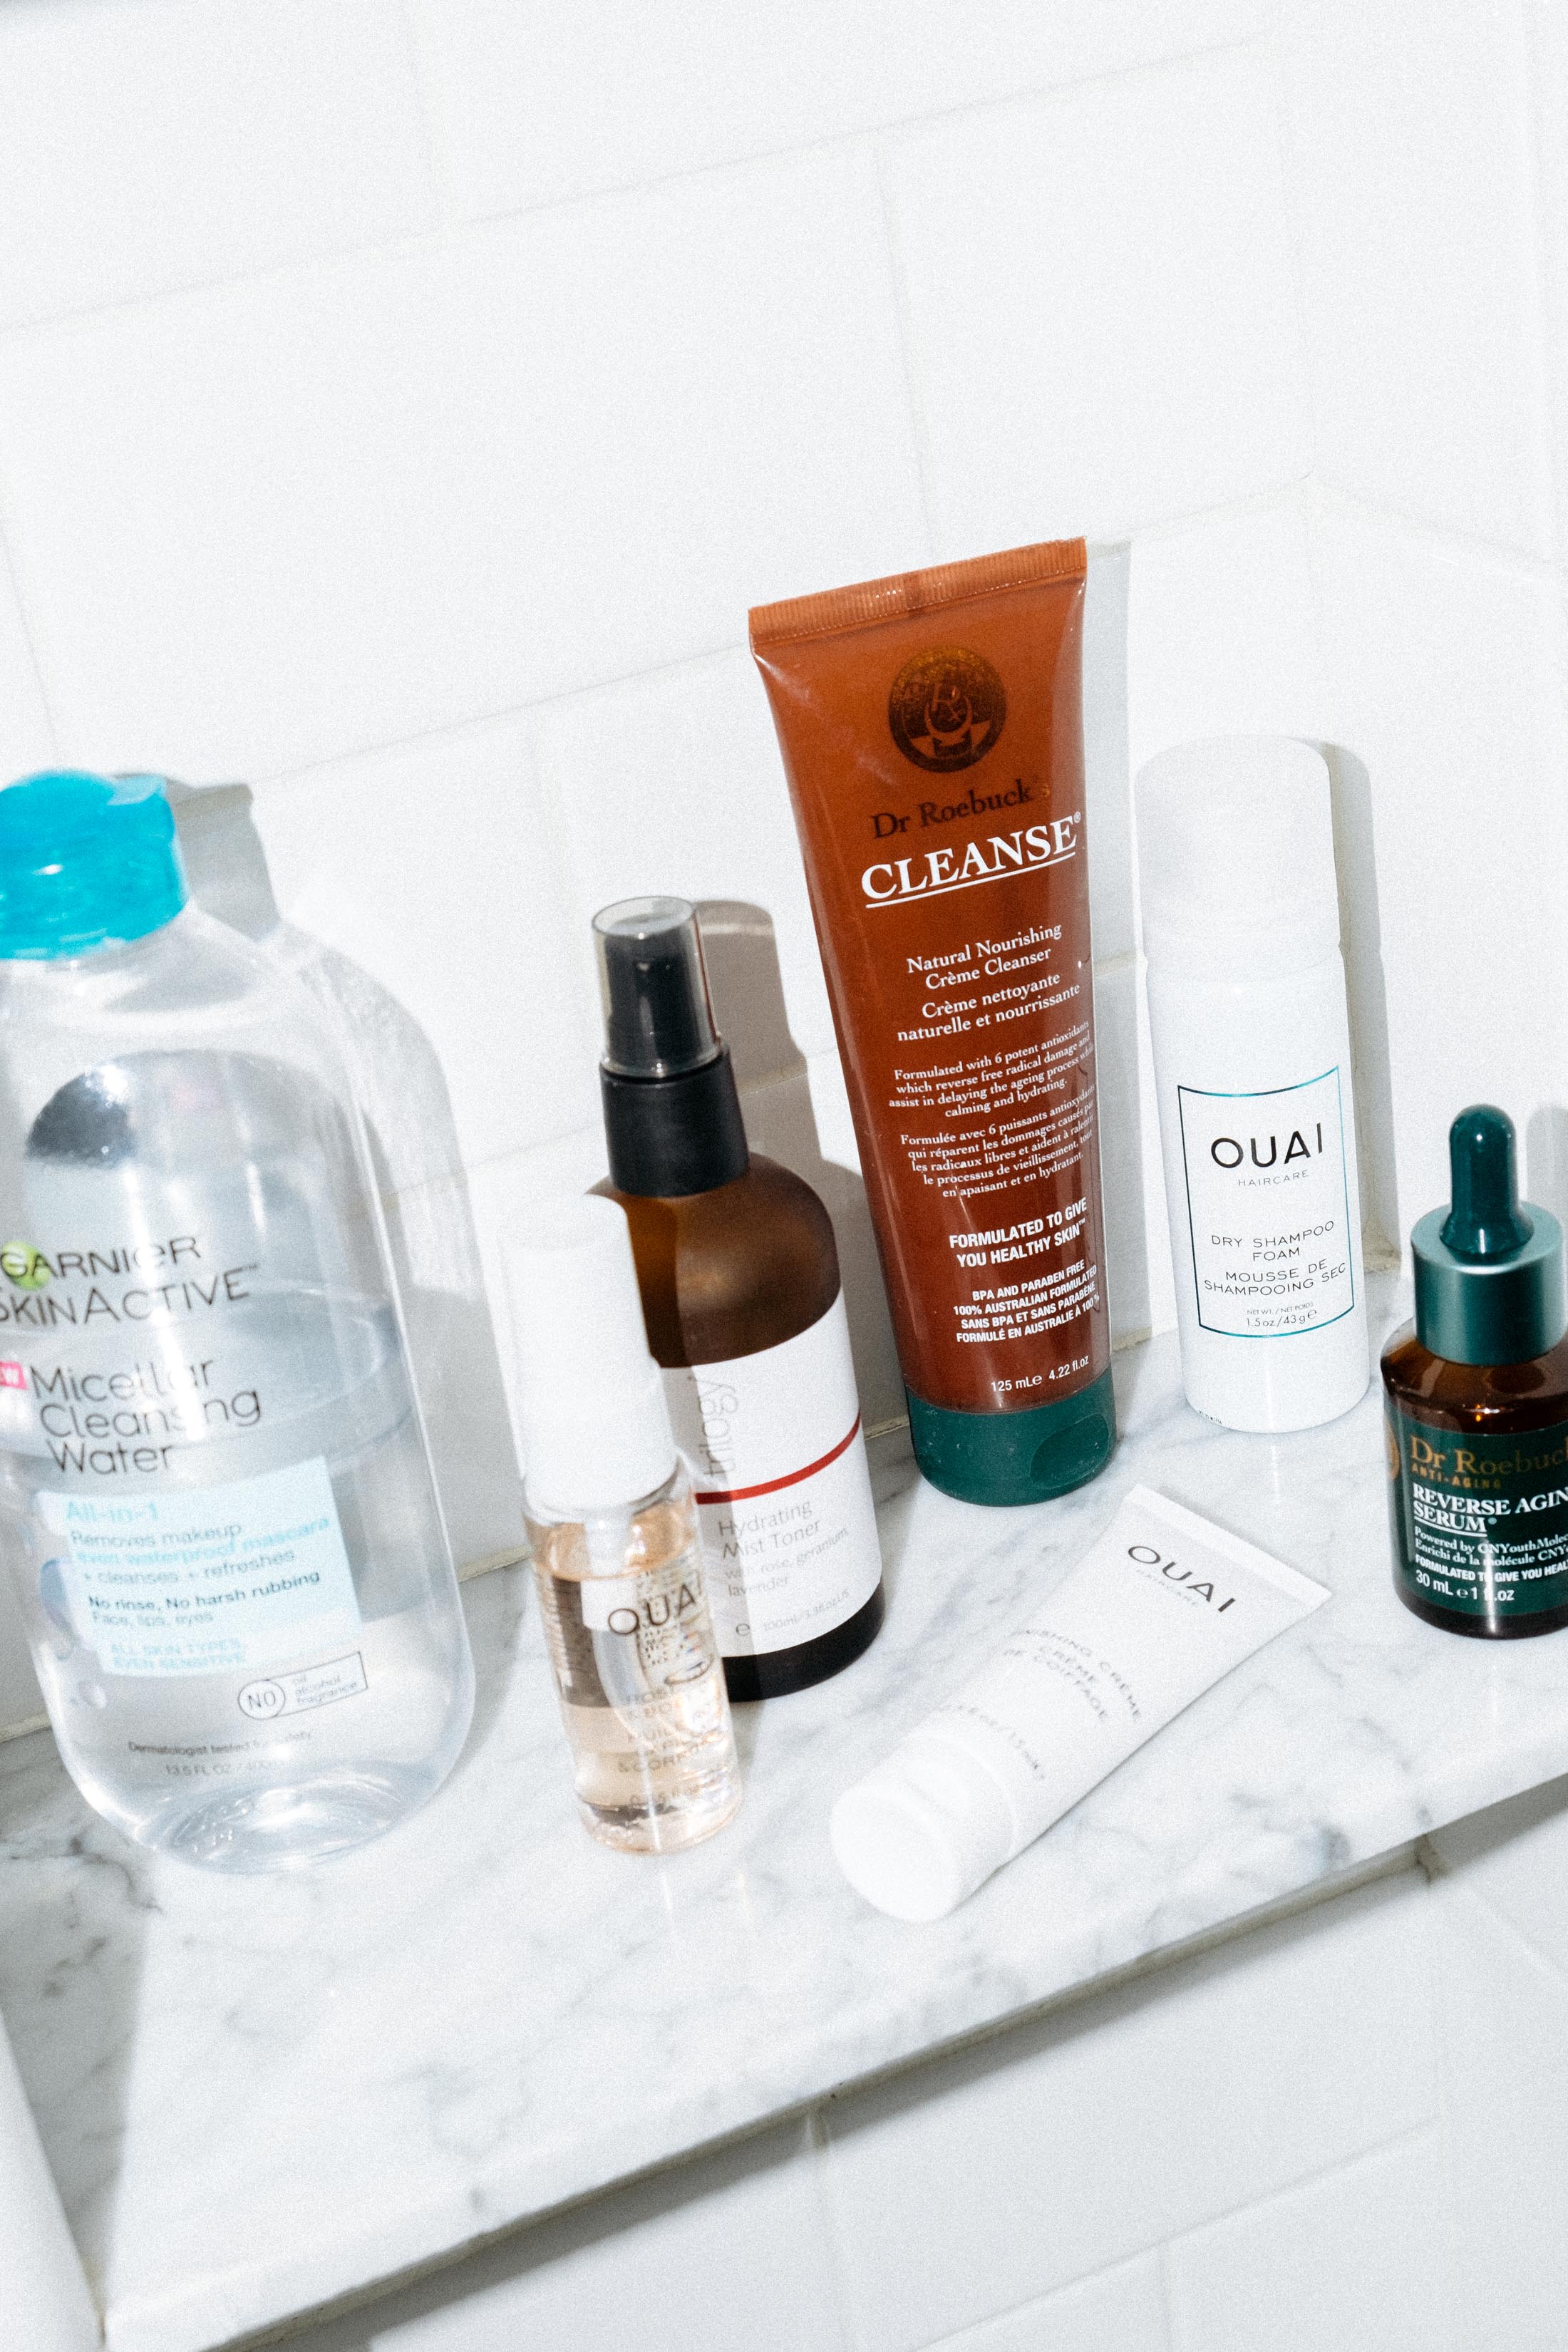 Dr. Roebuck's, Ouai, Trilogy and Garnier beauty products